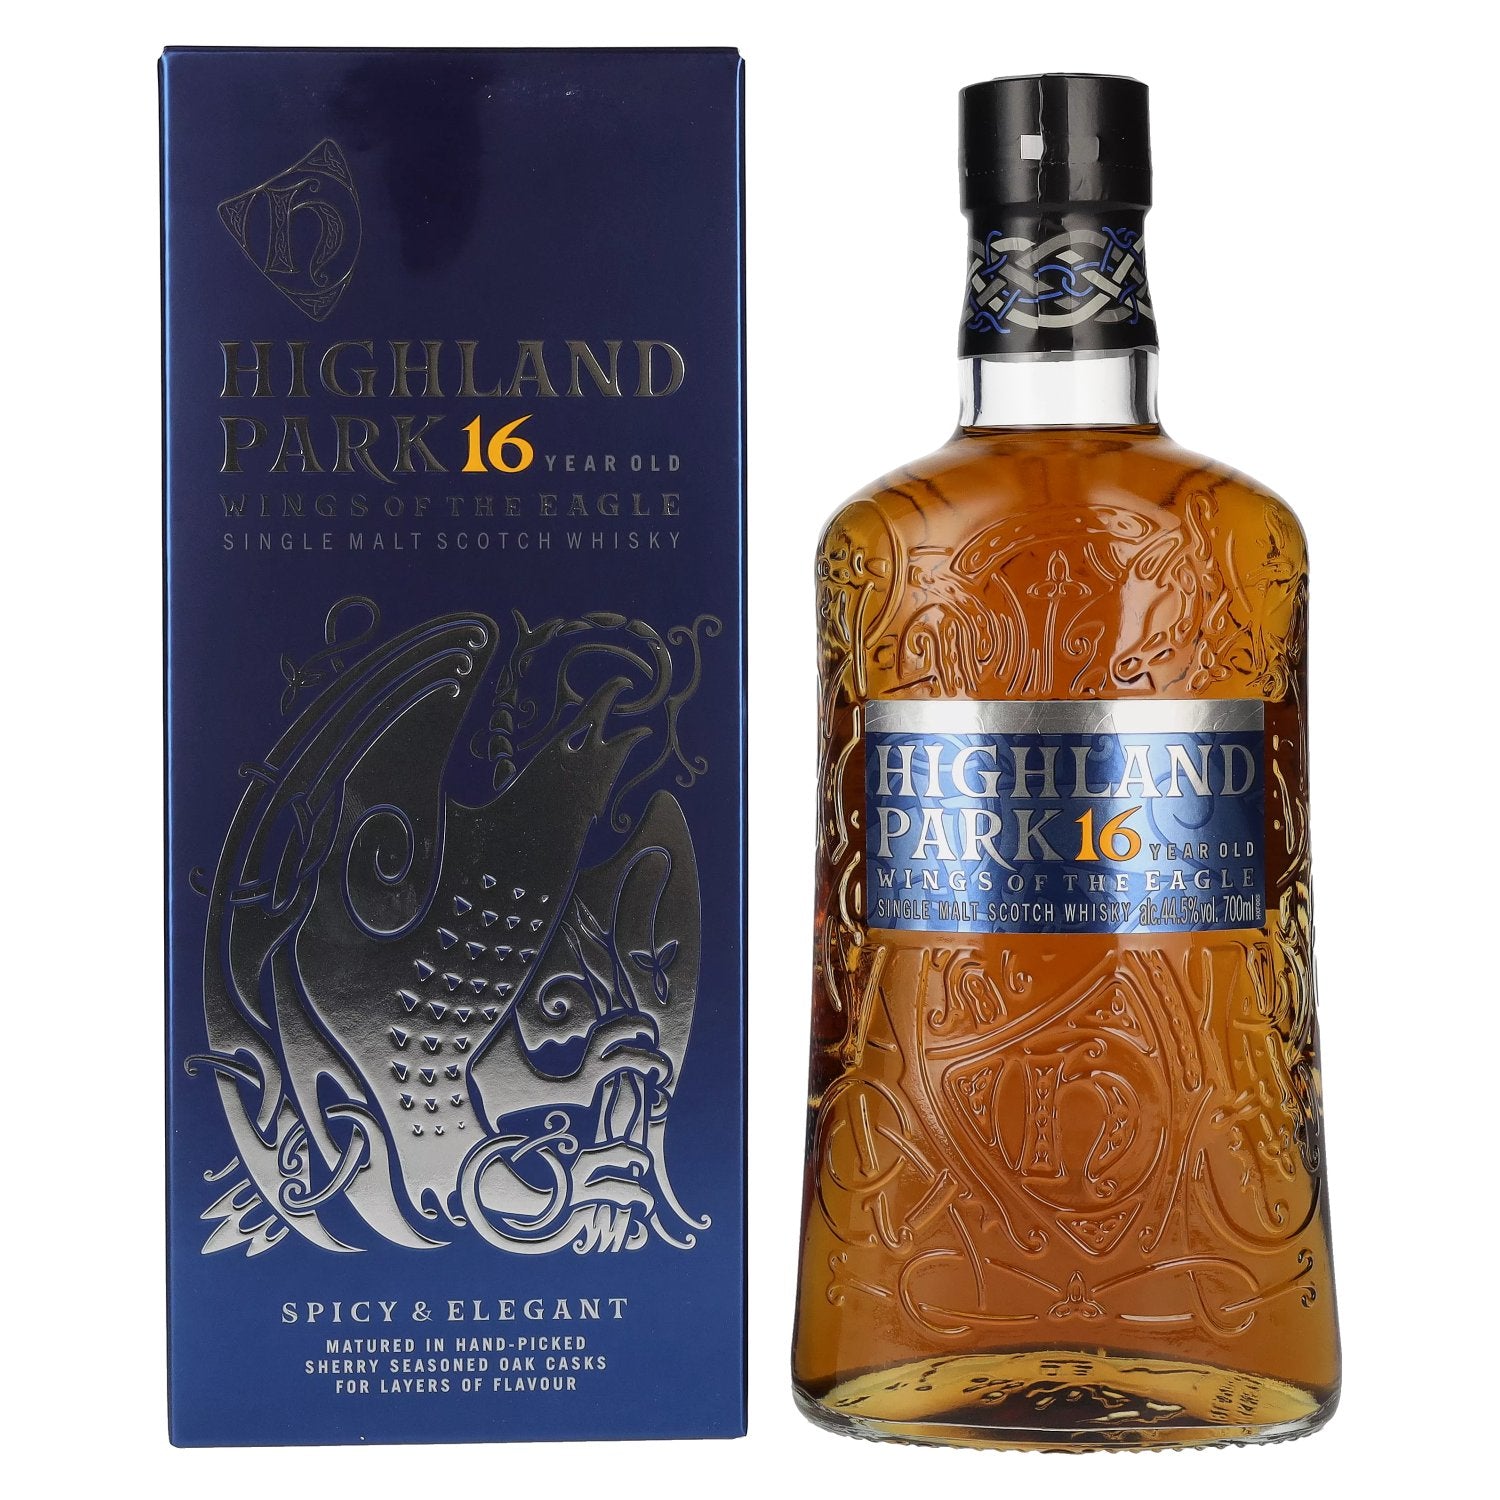 Highland Park 16 Years Old WINGS OF THE EAGLE 44,5% Vol. 0,7l in Giftbox